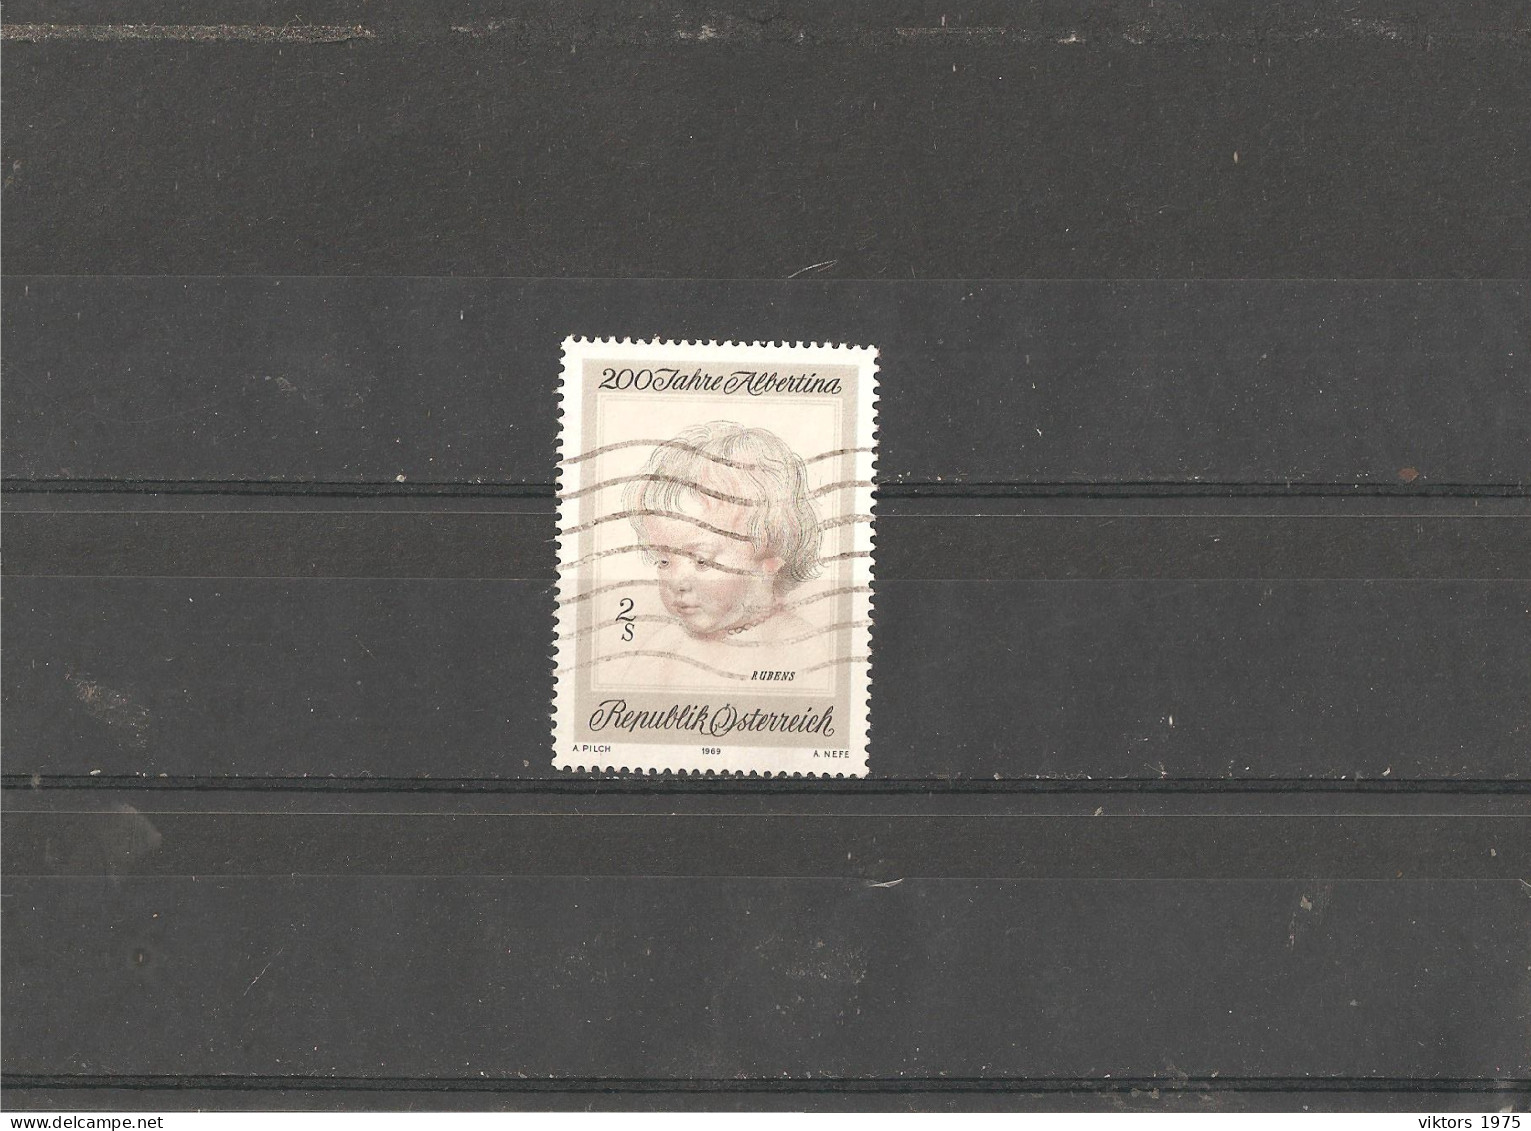 Used Stamp Nr.1311 In MICHEL Catalog - Used Stamps